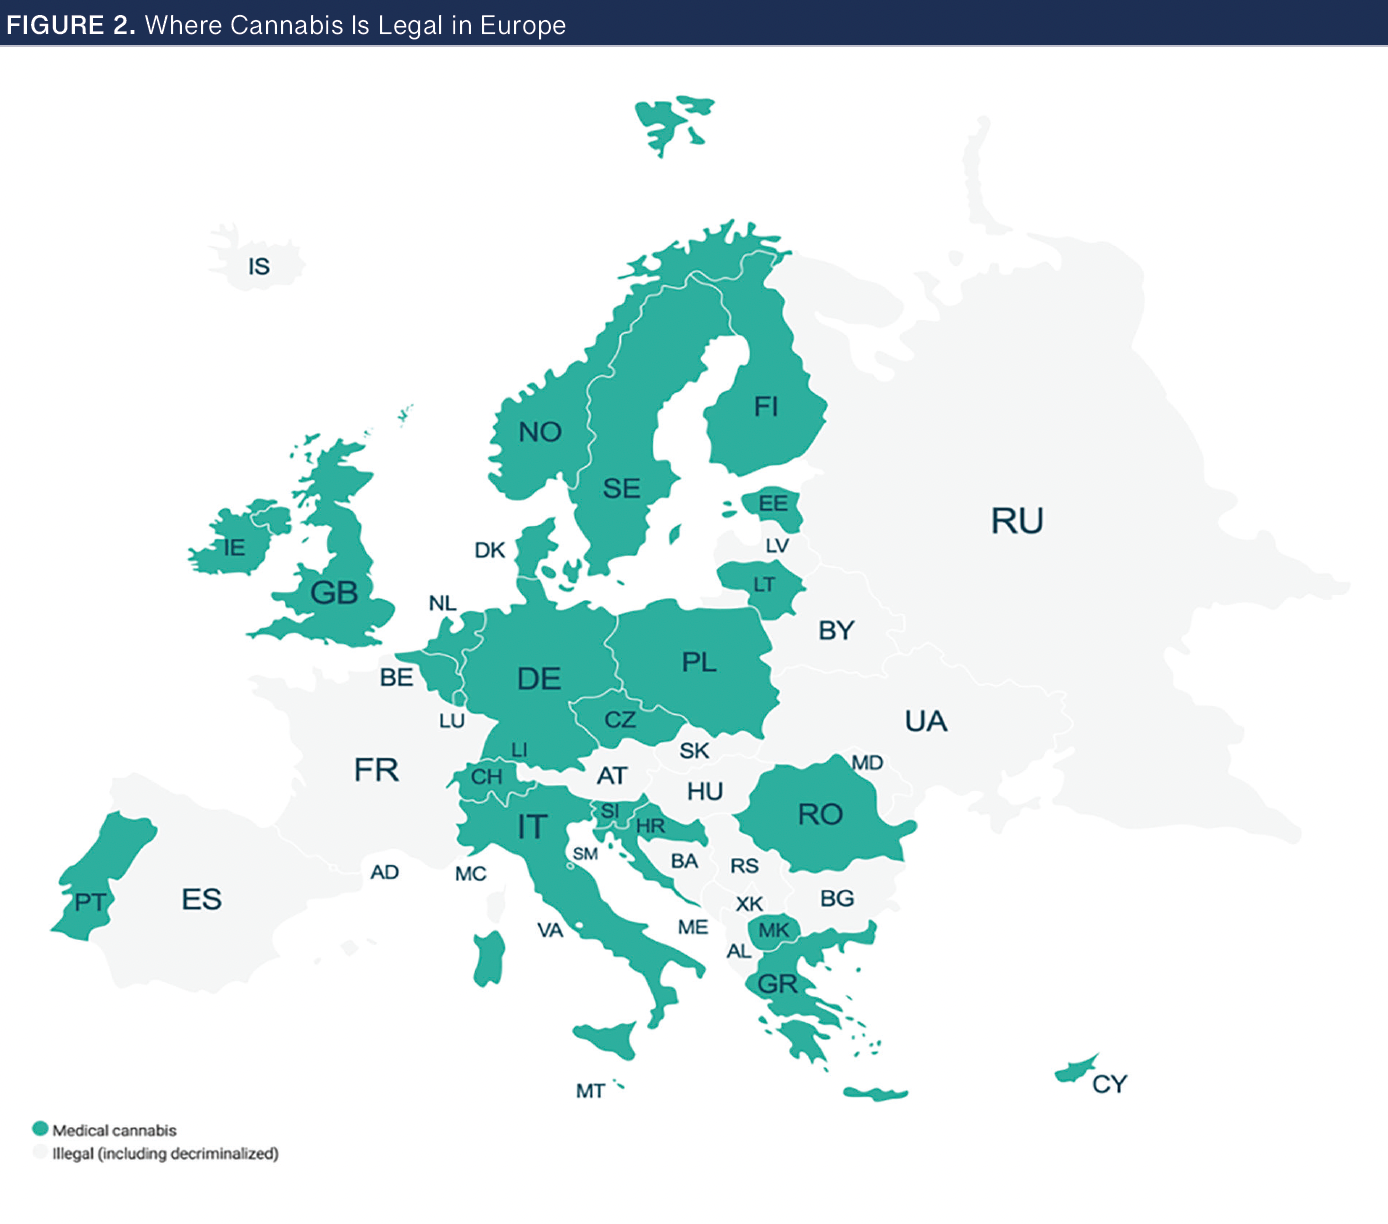 Representing Europe’s legal cannabis landscape, this map illustrates widespread medical adoption across the European Union (EU). This map was last updated in December 2022, and the most significant change since then is Germany’s legalization of adult use cannabis in April 2024. The evolving regulatory landscape in the EU mirrors shifting attitudes and policy frameworks across the continent and globe. Image sourced with permission from The Cannigma.